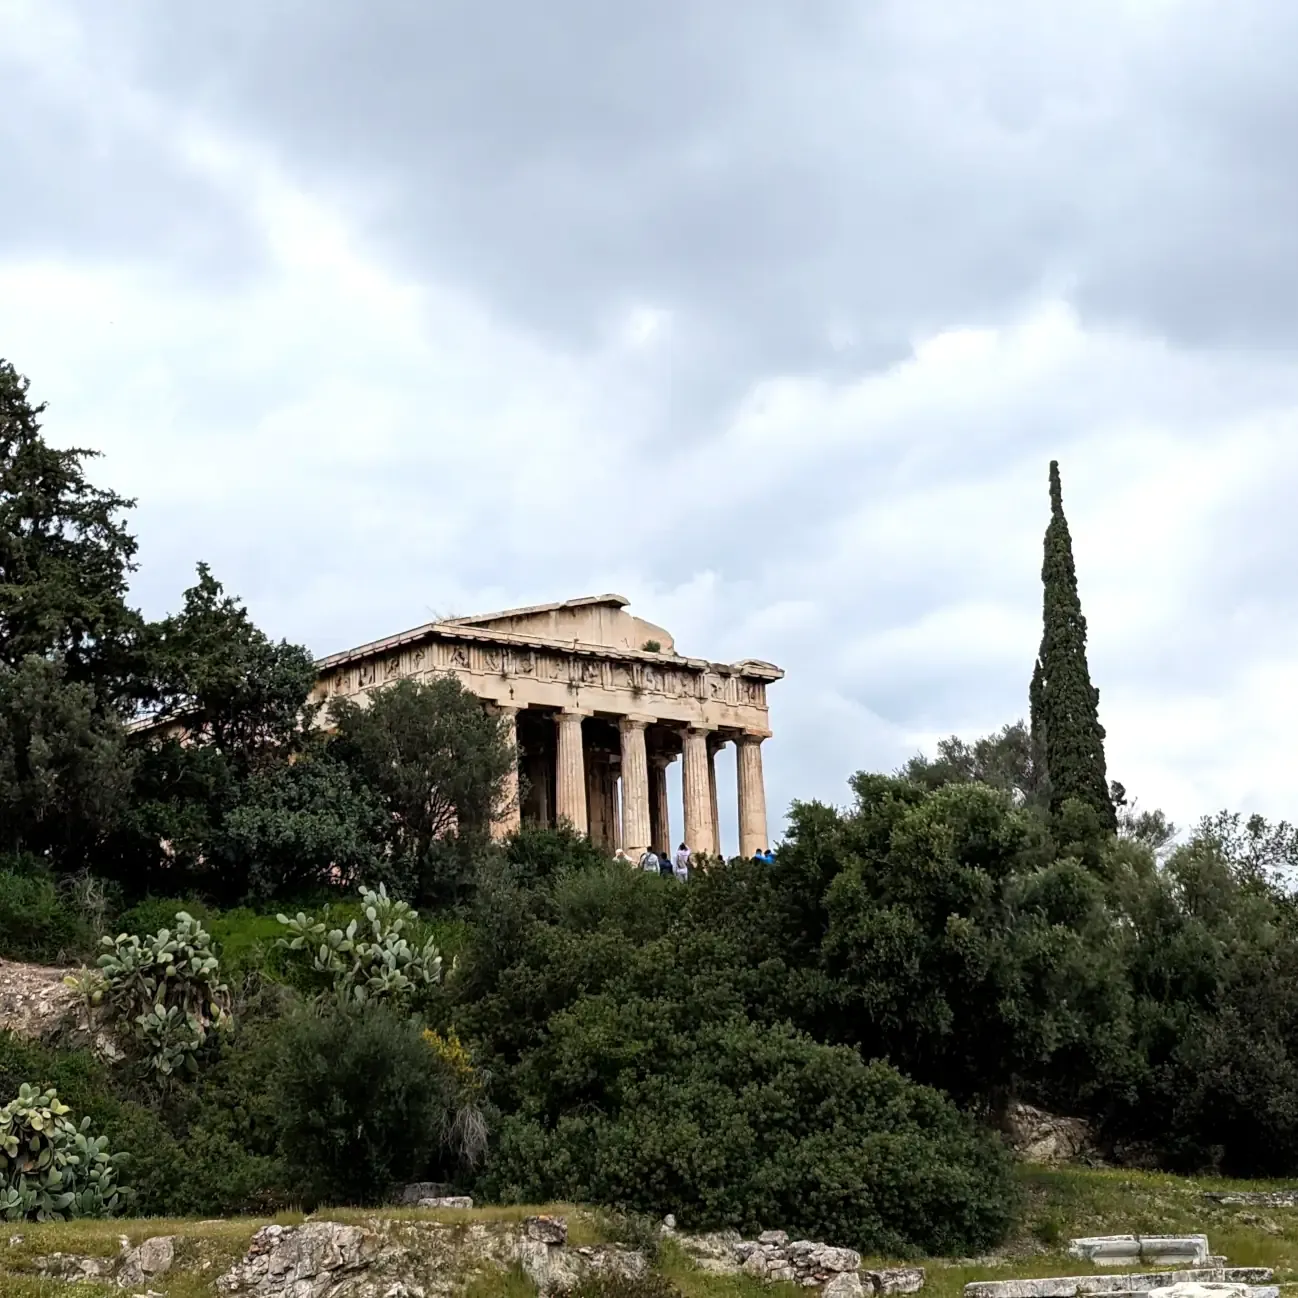 The Temple of Hephaestus next to the Ancient Agora